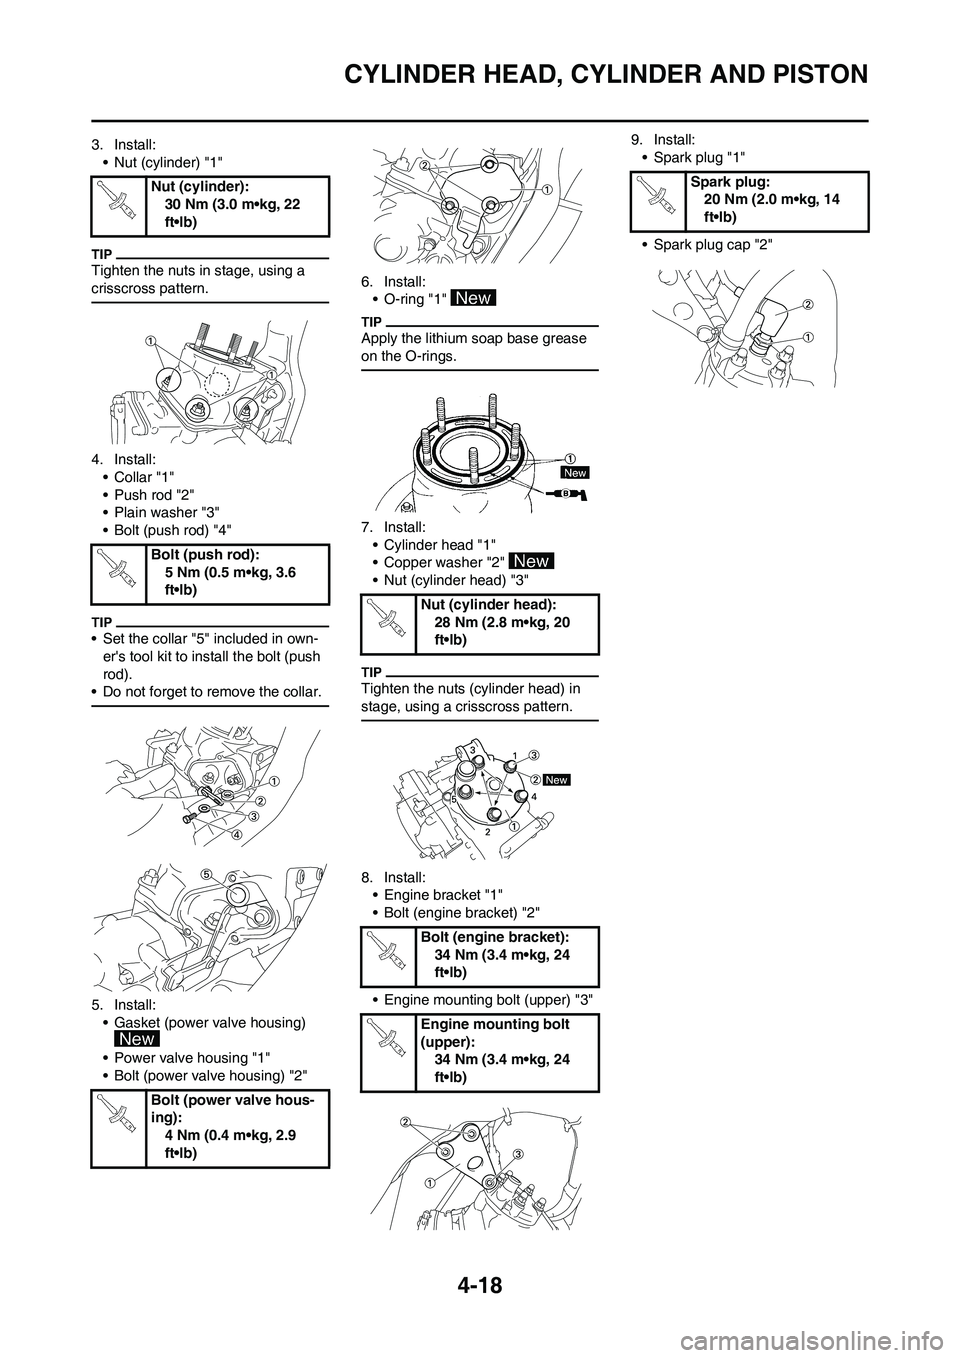 YAMAHA YZ125LC 2010 Owners Guide 4-18
CYLINDER HEAD, CYLINDER AND PISTON
3. Install:
• Nut (cylinder) "1"
Tighten the nuts in stage, using a 
crisscross pattern.
4. Install:
•Collar "1"
• Push rod "2"
• Plain washer "3" 
• 